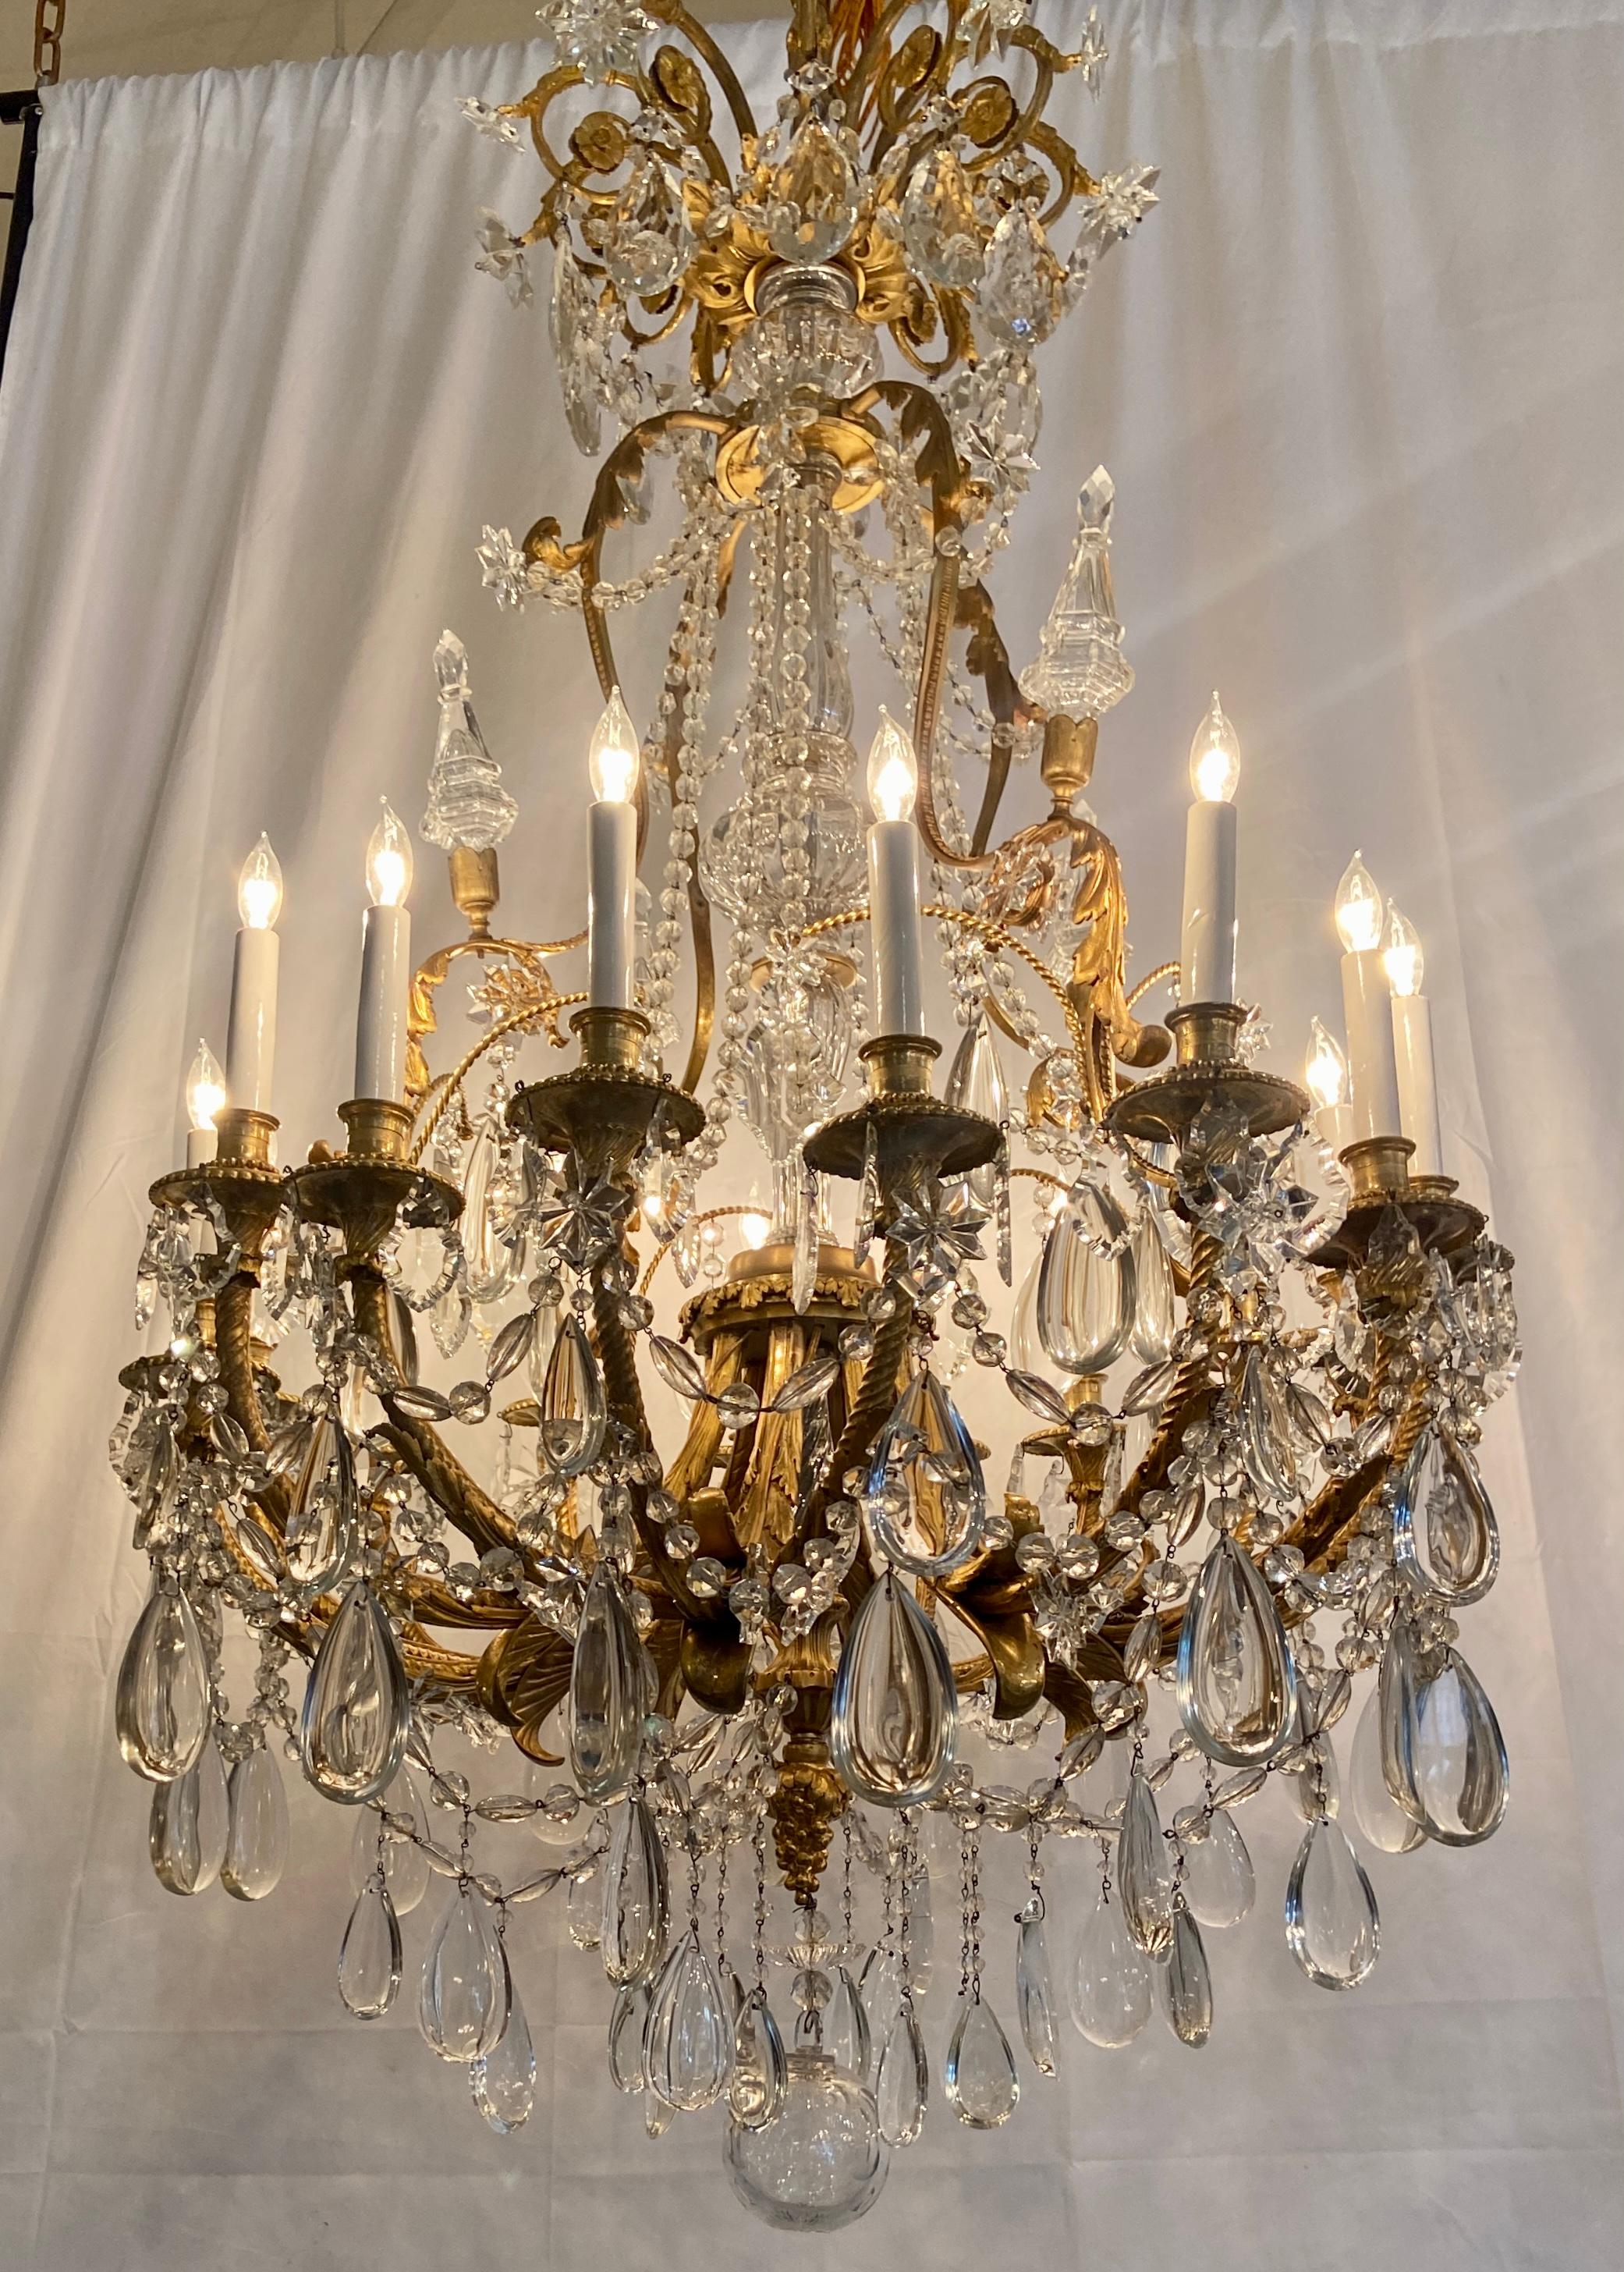 19th Century Antique French Ormolu Bronze and Baccarat Crystal Chandelier, Circa 1860 For Sale